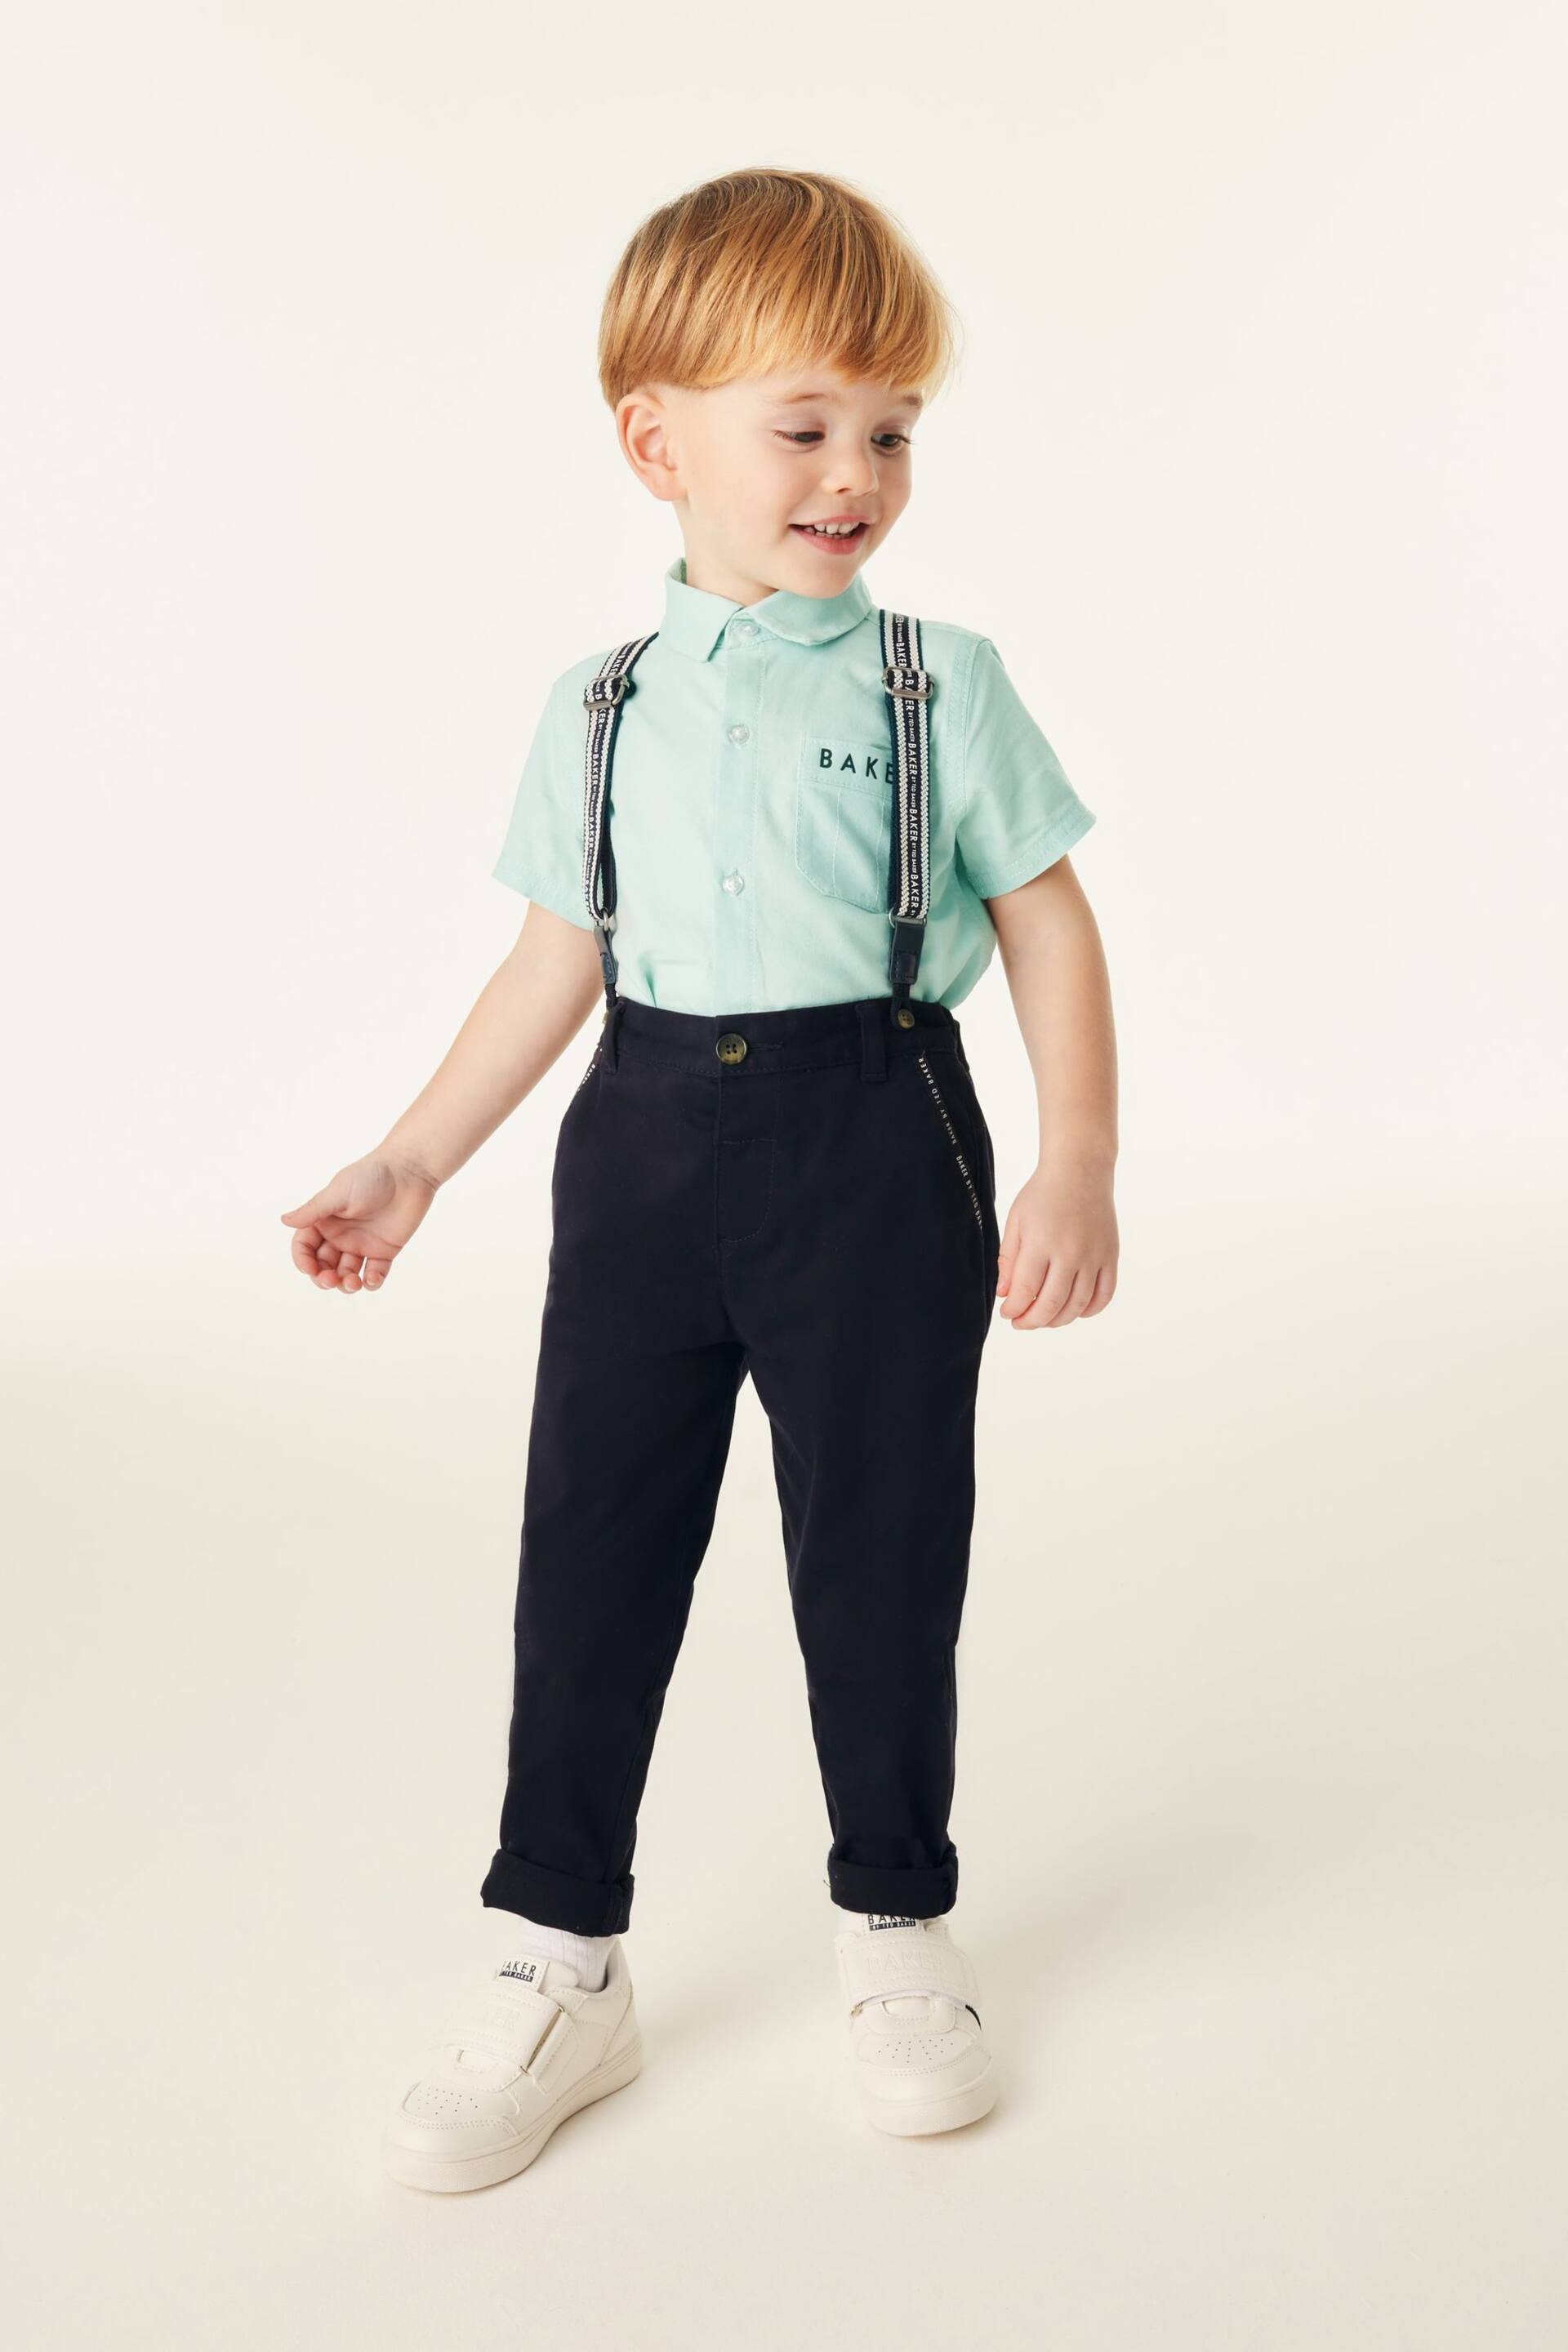 Baker by Ted Baker Shirt and Trousers Set - Image 1 of 11